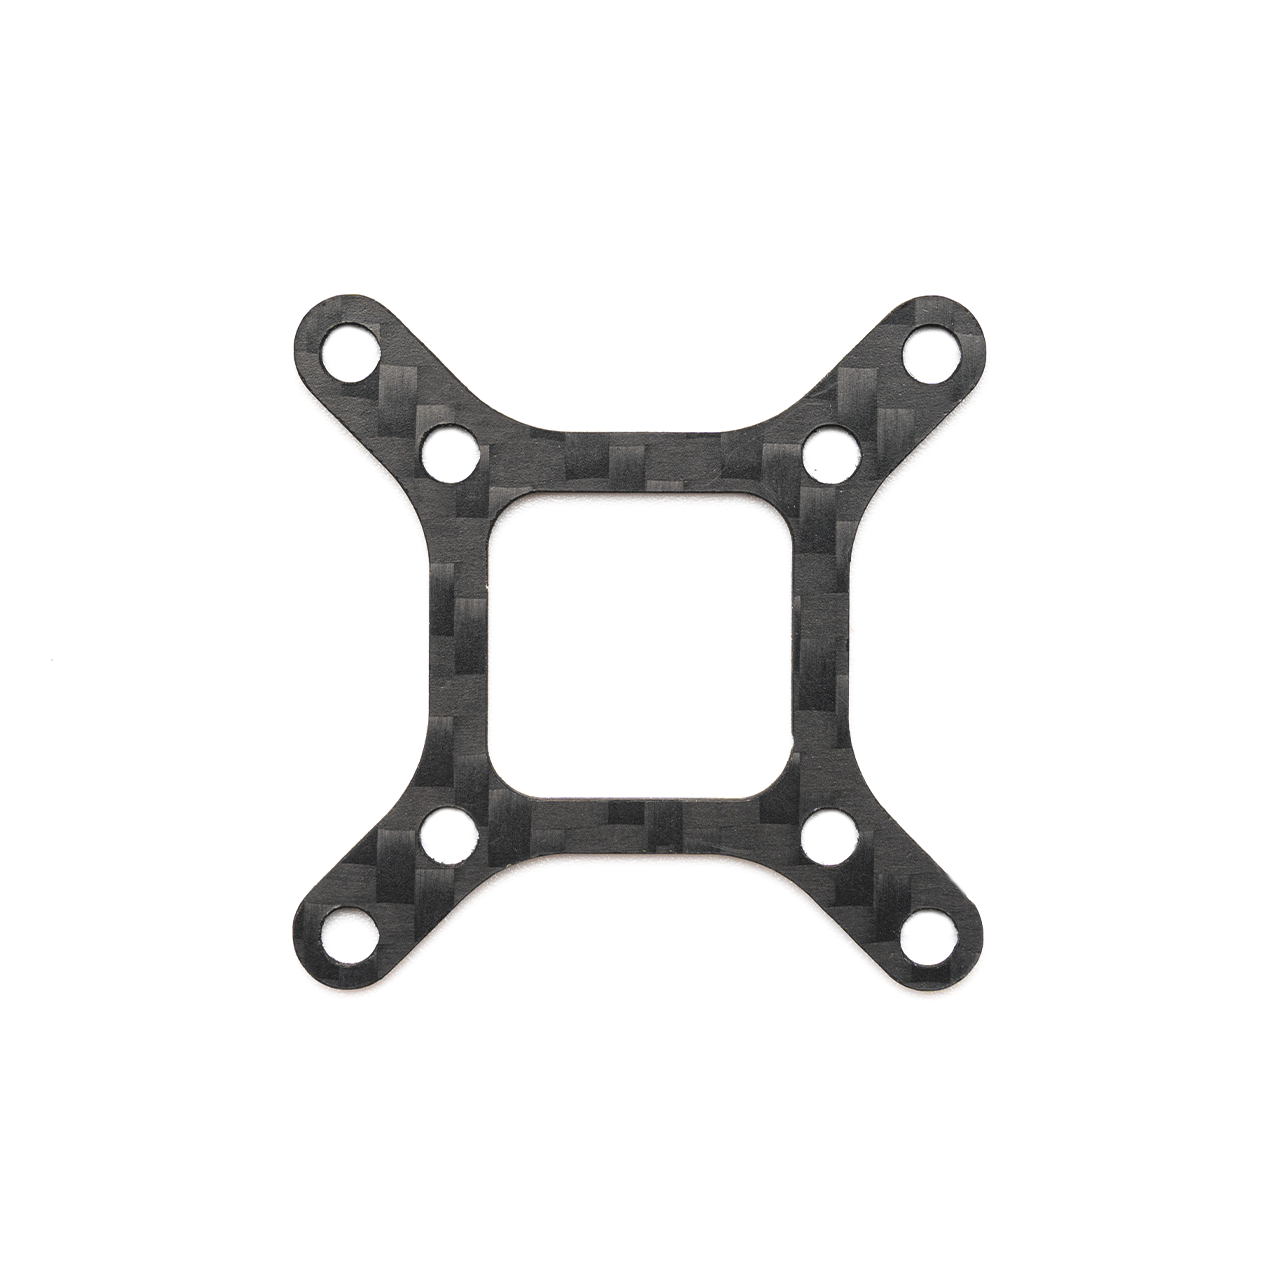 Adapter Plate Kit